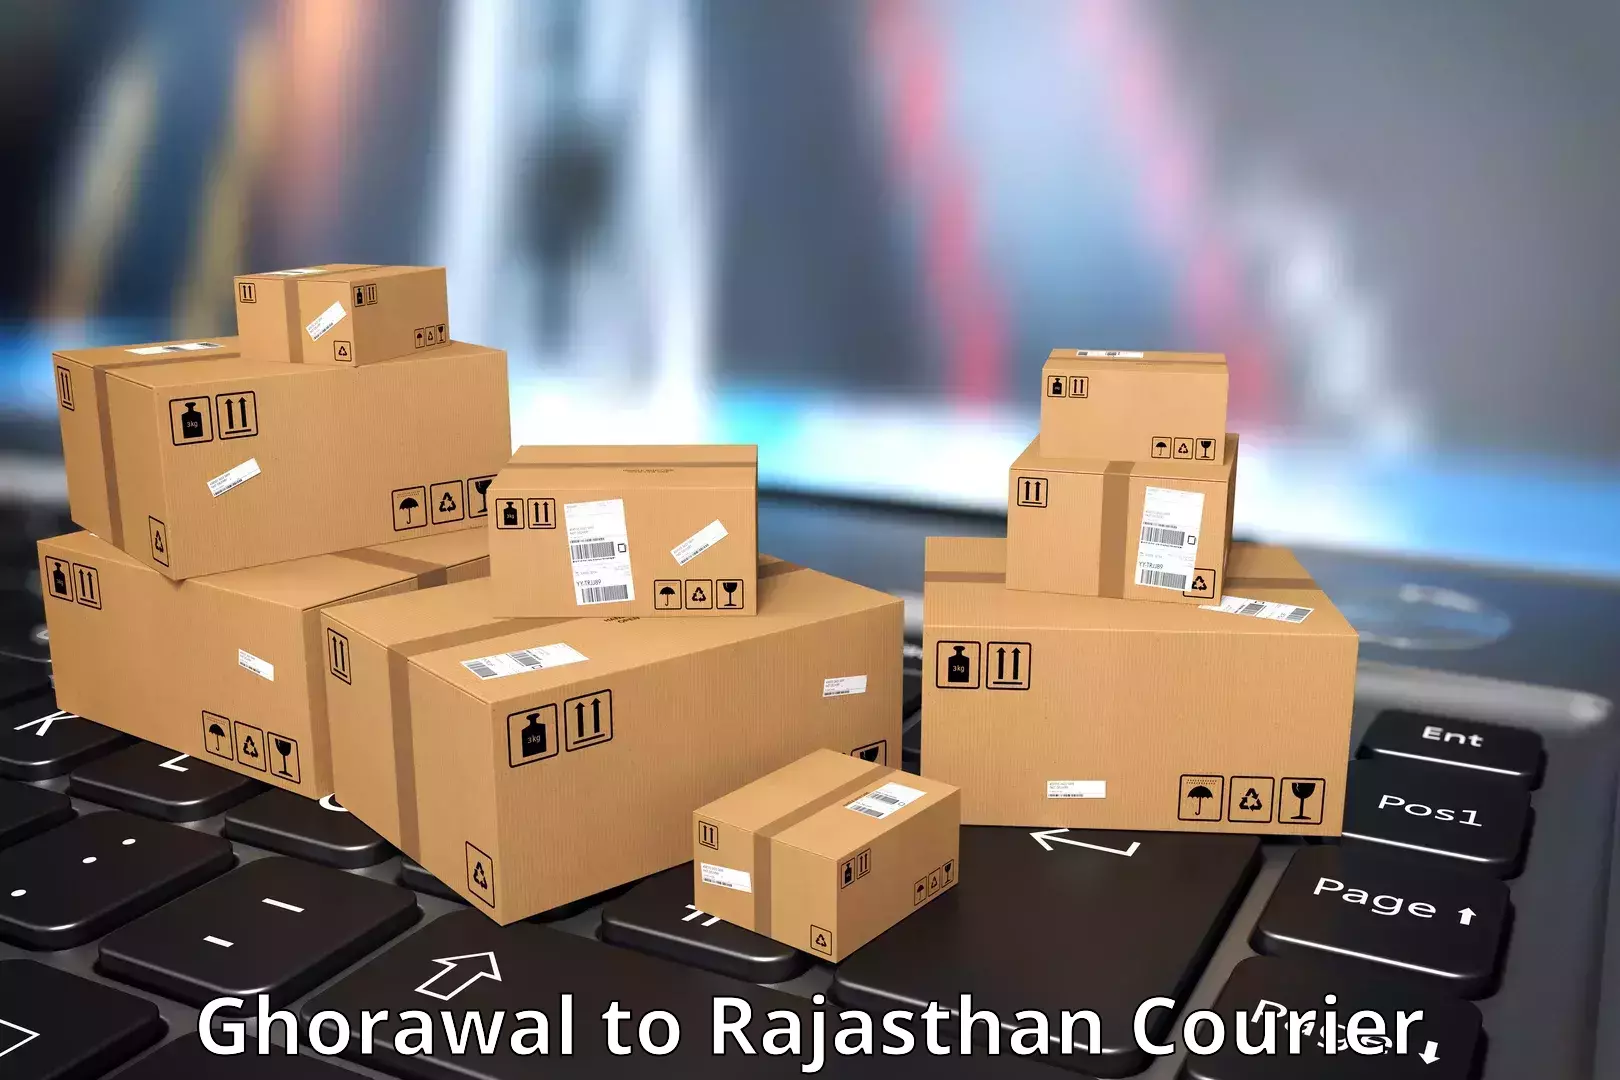 Small business couriers Ghorawal to Pilani